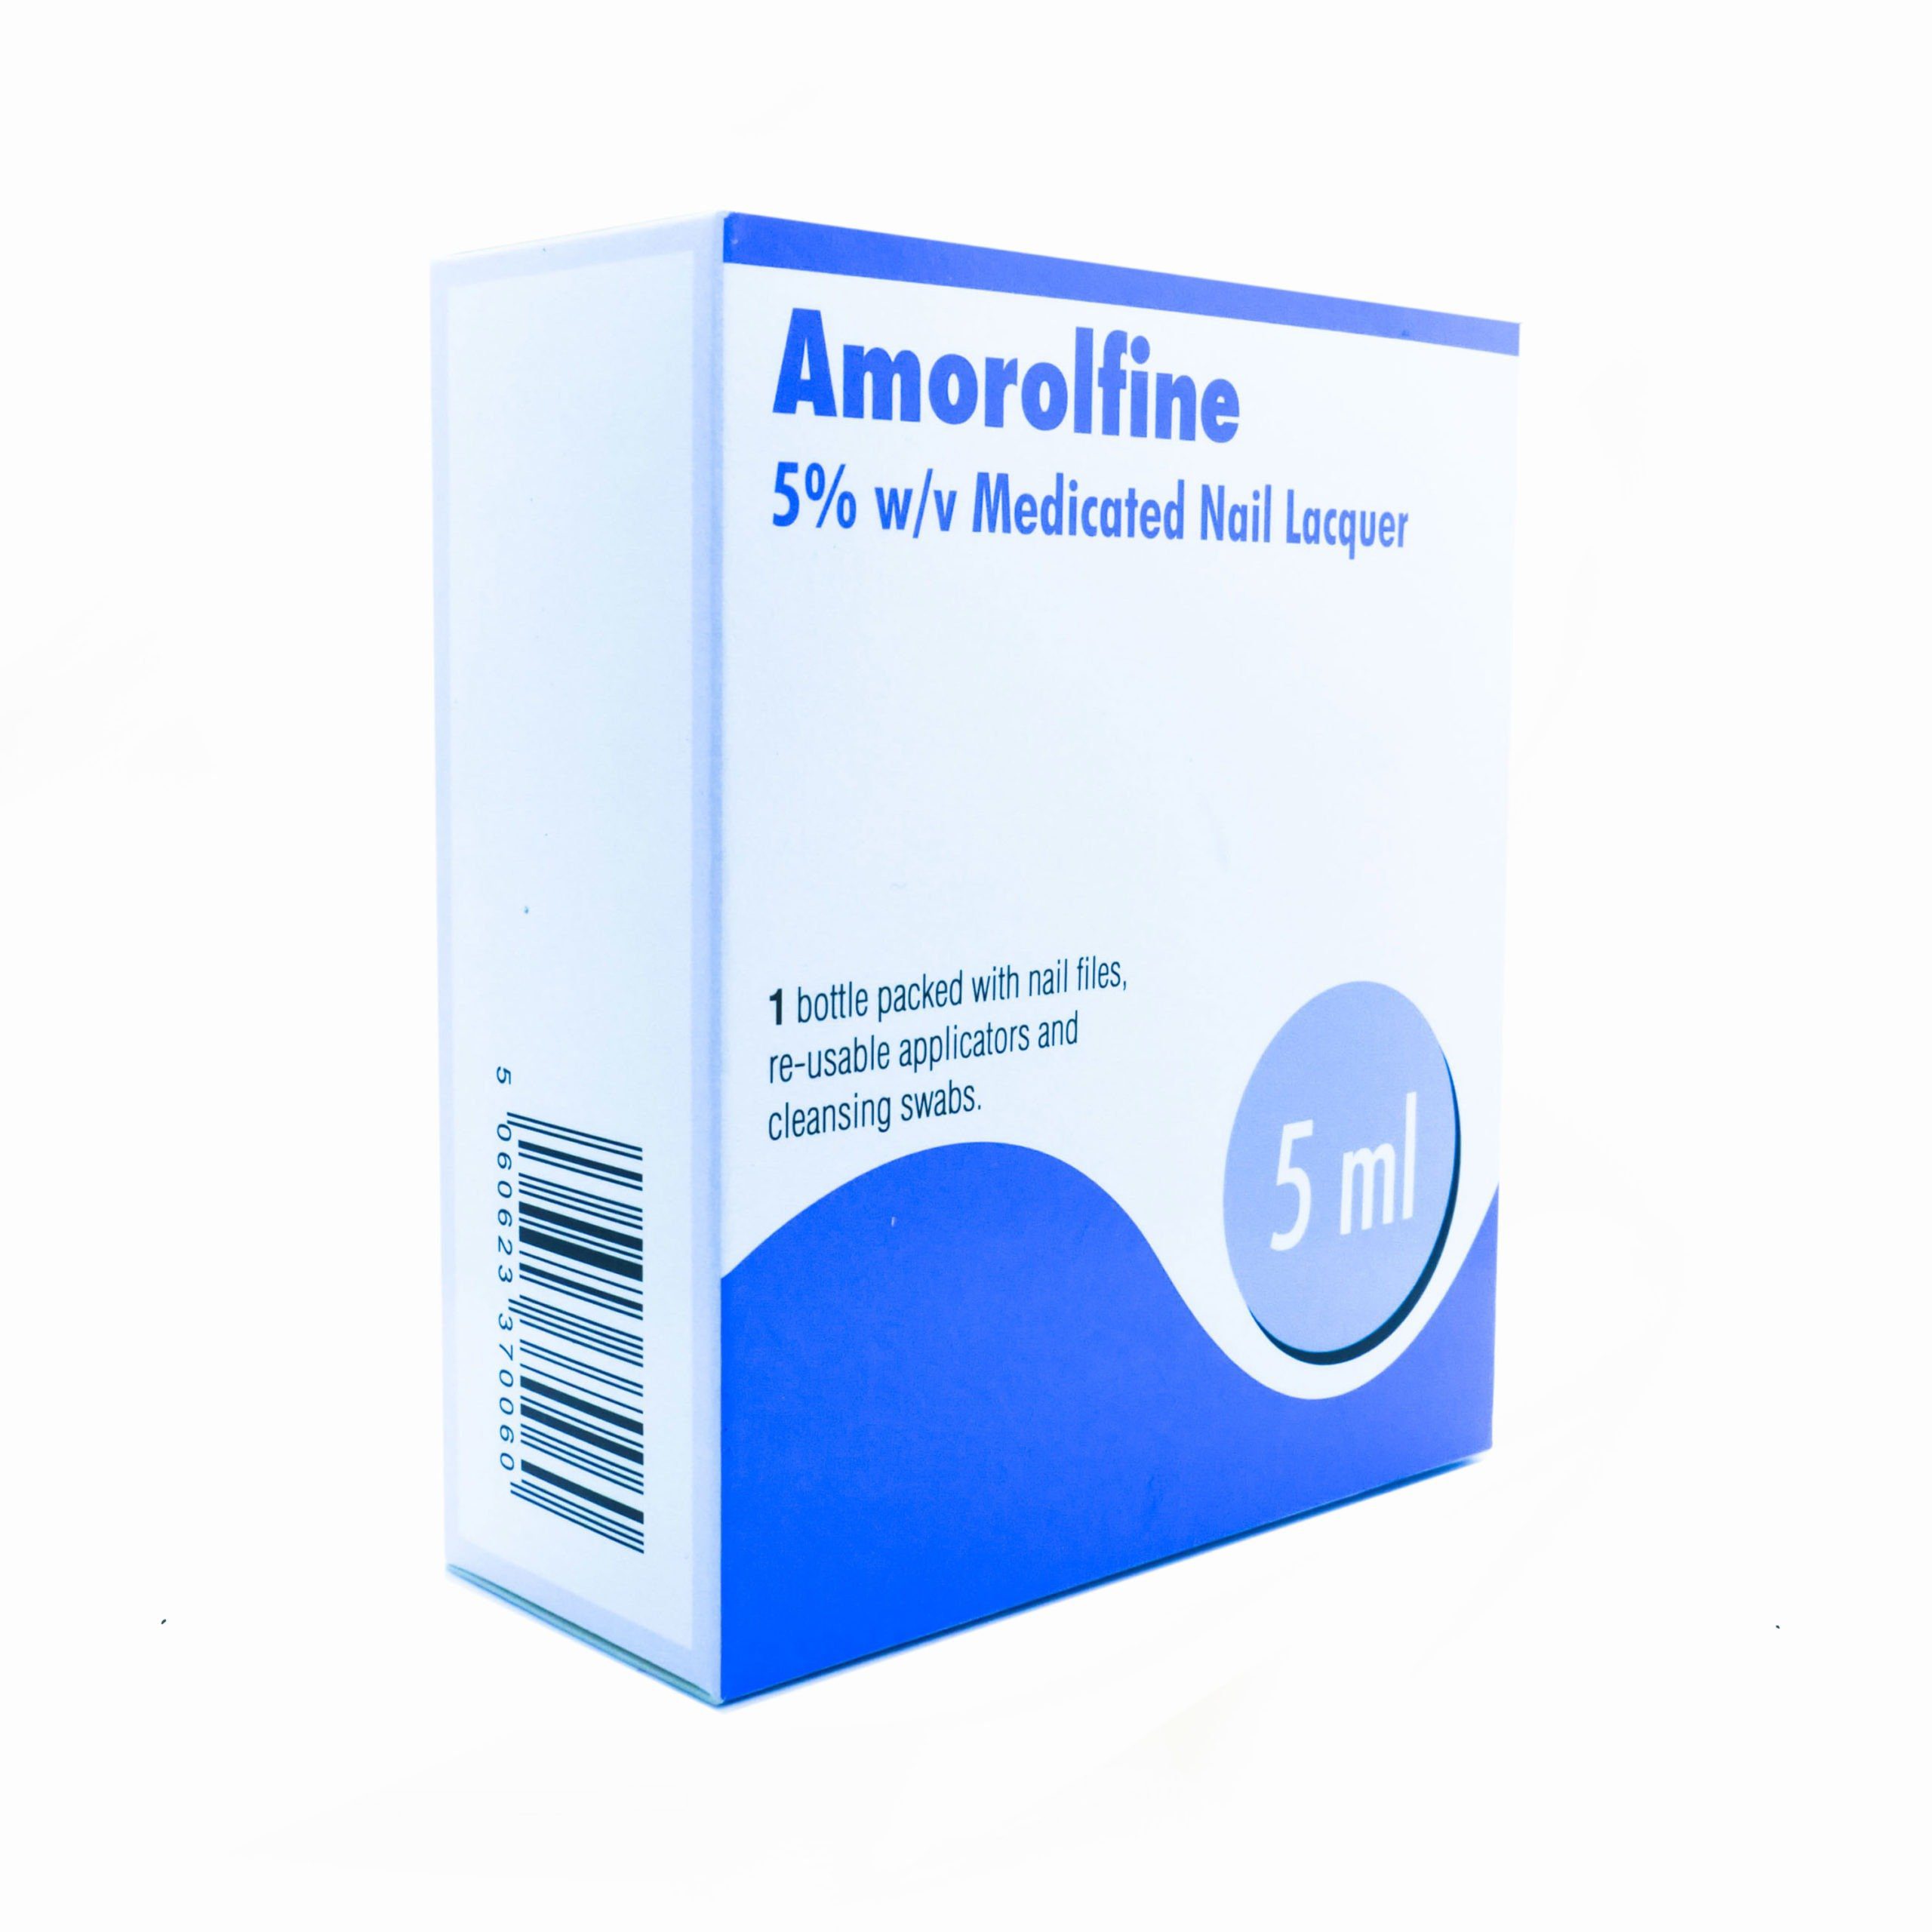 Amorolfine 5% w/v Medicated Nail Fungal Treatment Lacquer 3ml